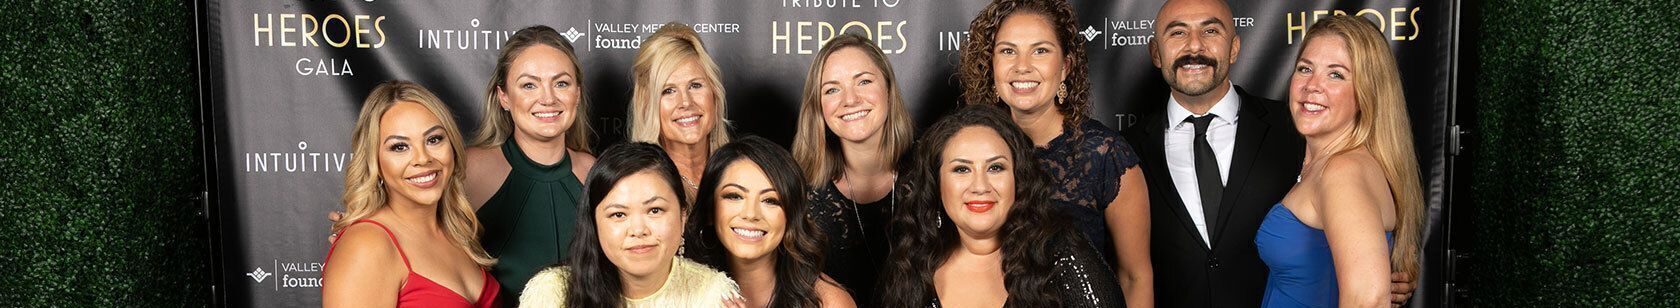 Valley Health Foundation Staff Tribute To Heroes Gala